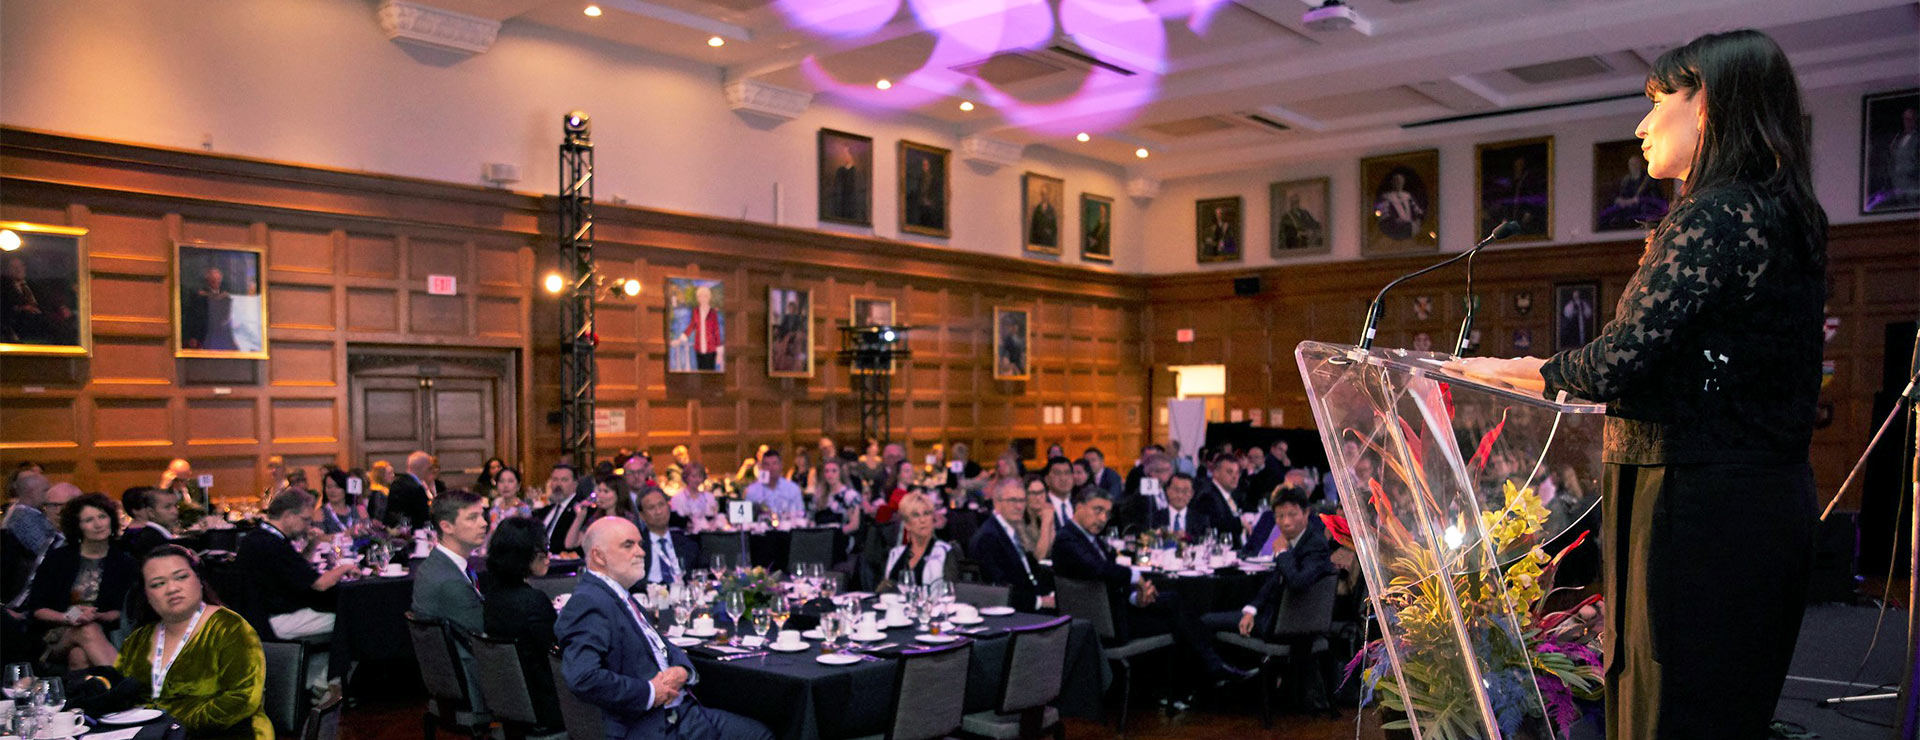 Professionals seated at a dinner for the Times Higher Education Summit 2018